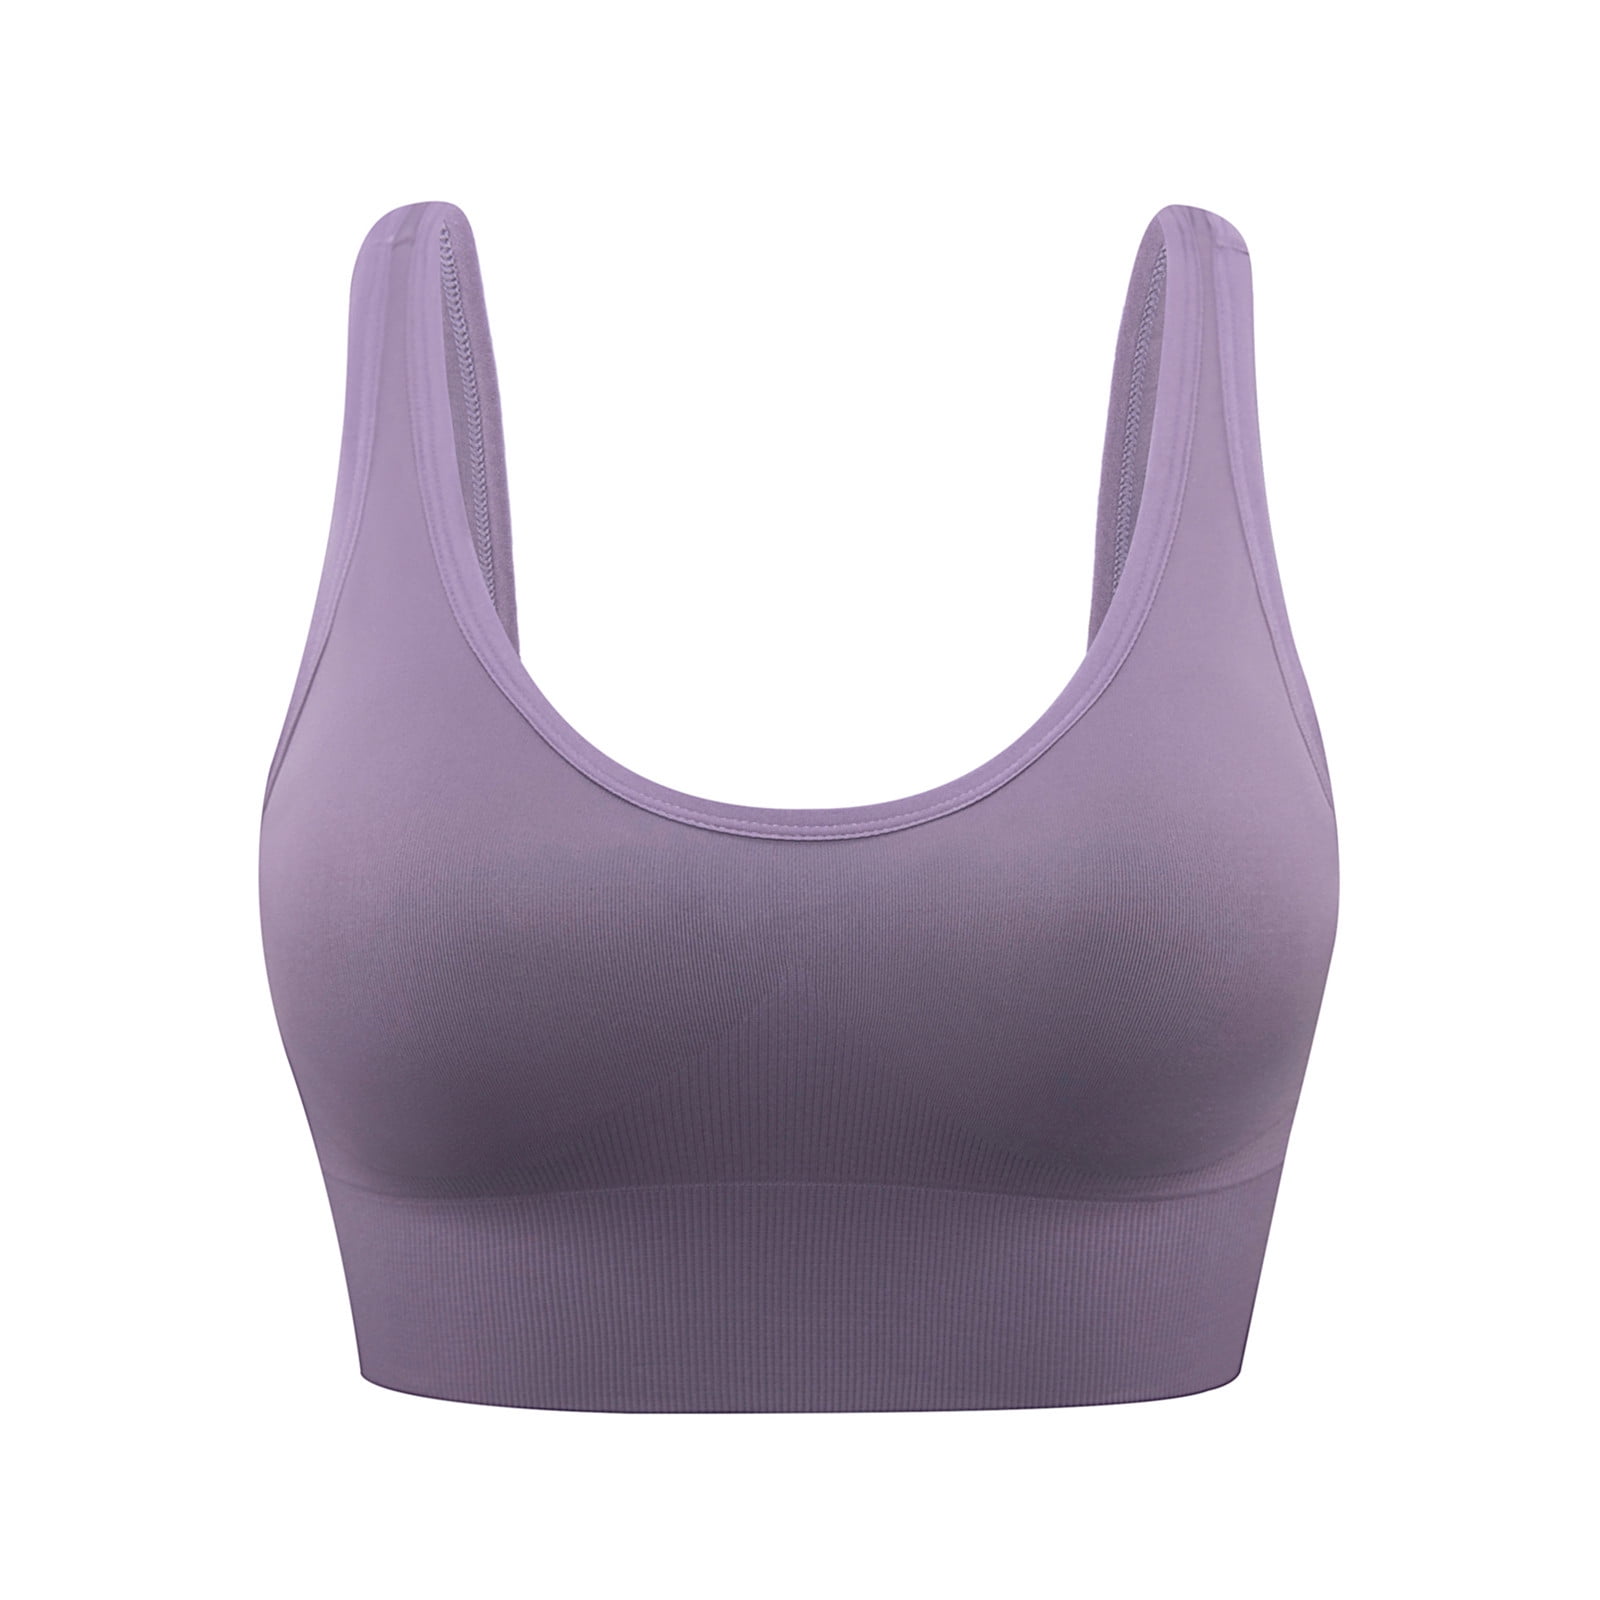 Fashion Sports Bras for Women Seamless Comfortable Yoga Bra with Removable Pads 